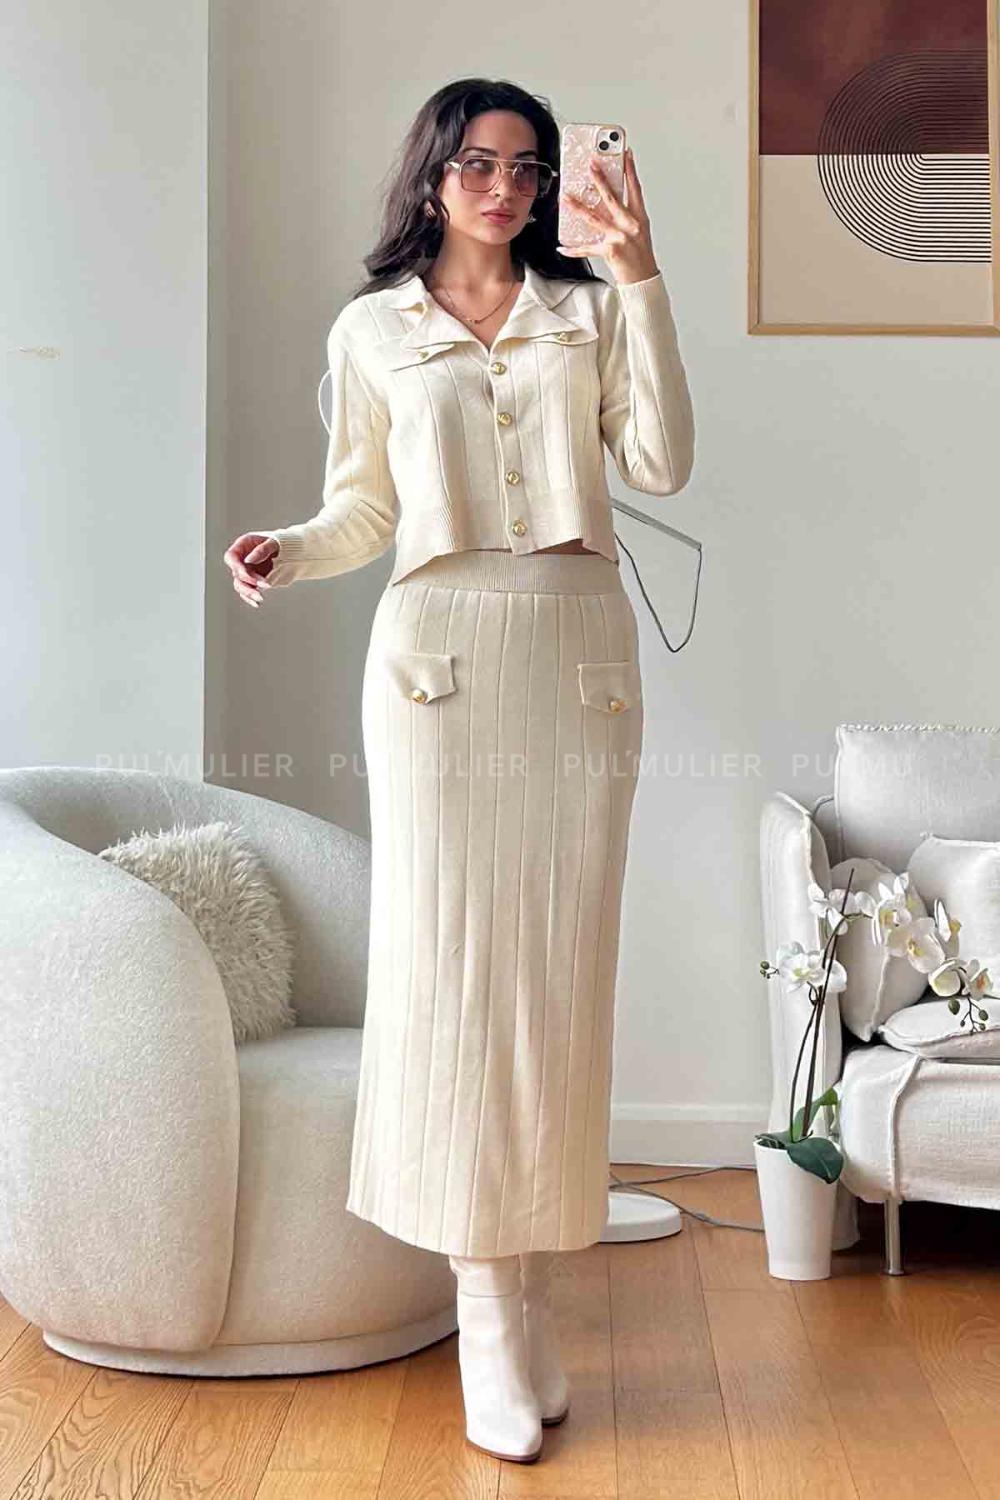 Cream Scoop Neck Long Arm Without Accessories Cotton Fabric Regular Trousers Comfortable Suit